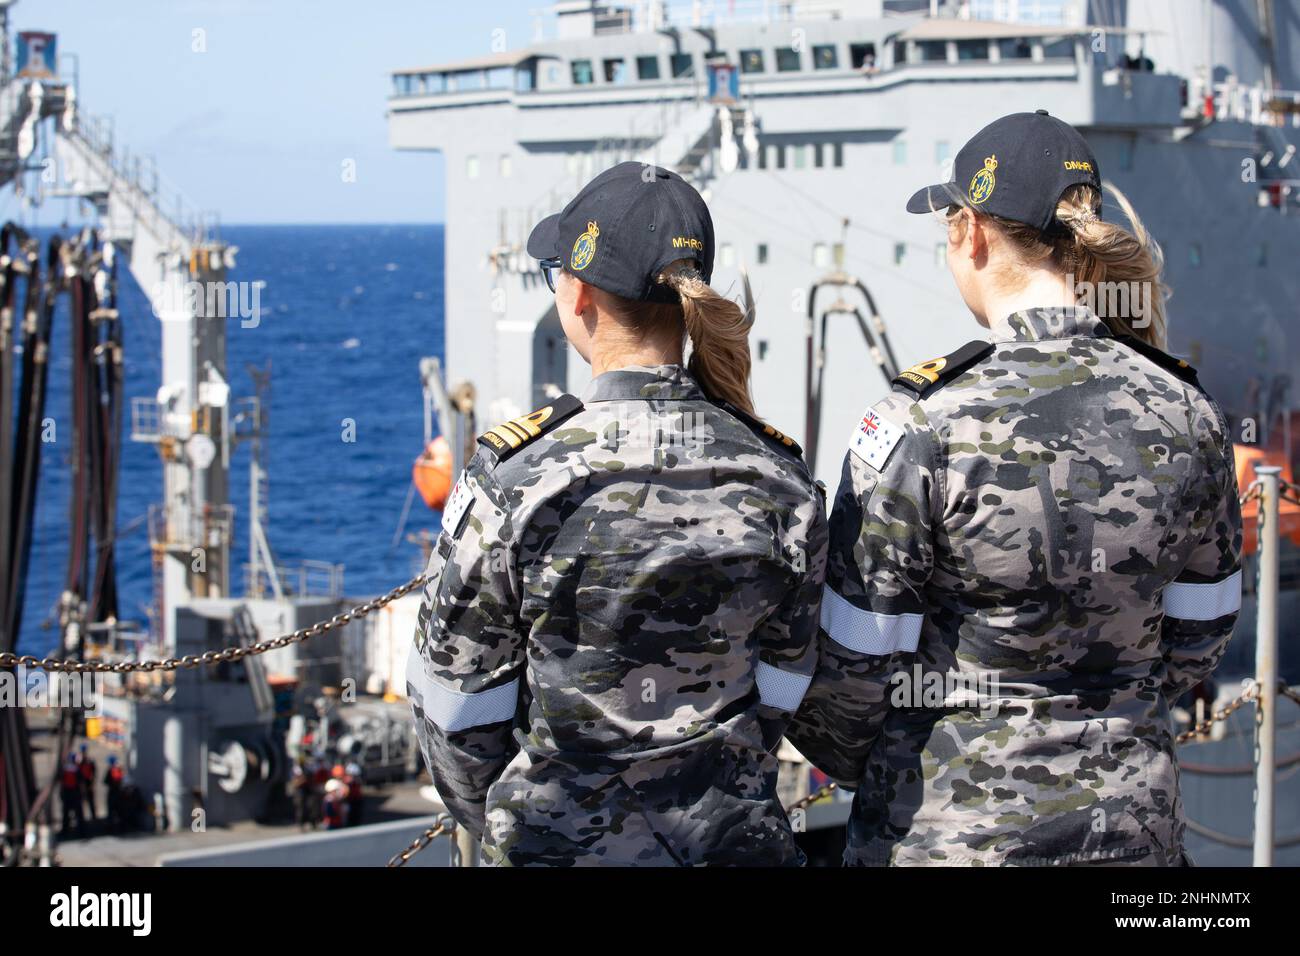 PACIFIC OCEAN (July 31, 2022) Royal Australian Navy Maritime Human Resources Officers Lt. Cmdr. Laura Watman and Sub-Lt. Katelyn Kirshaw observe a replenishment-at-sea conducted between U.S. Henry J. Kaiser-class fleet replenishment oiler USNS Henry J. Kaiser (T-AO 187) and Royal Australian Navy Canberra-class landing helicopter dock HMAS Canberra (L02) during Rim of the Pacific (RIMPAC) 2022. Twenty-six nations, 38 ships, three submarines, more than 170 aircraft and 25,000 personnel are participating in RIMPAC from June 29 to Aug. 4 in and around the Hawaiian Islands and Southern California. Stock Photo